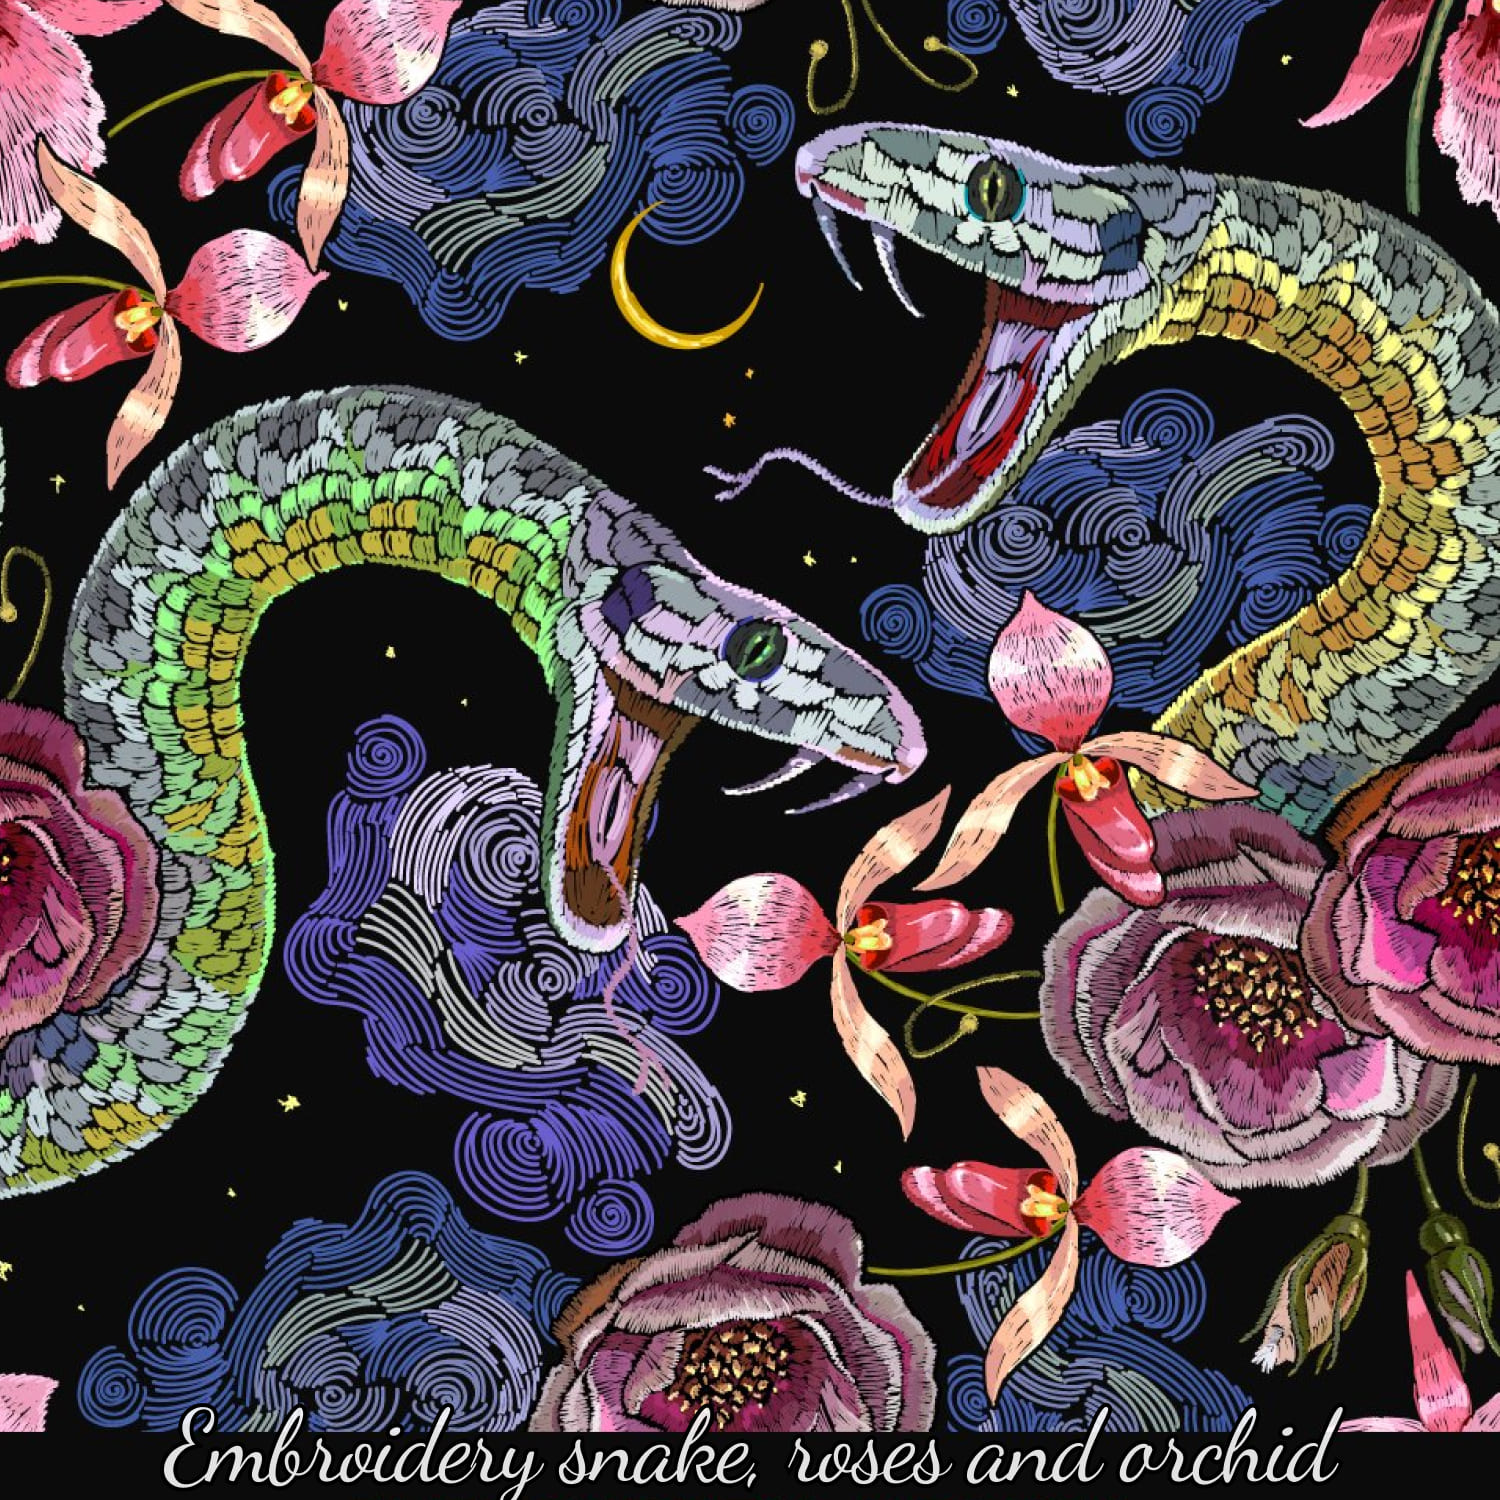 Embroidery snake, roses and orchid.